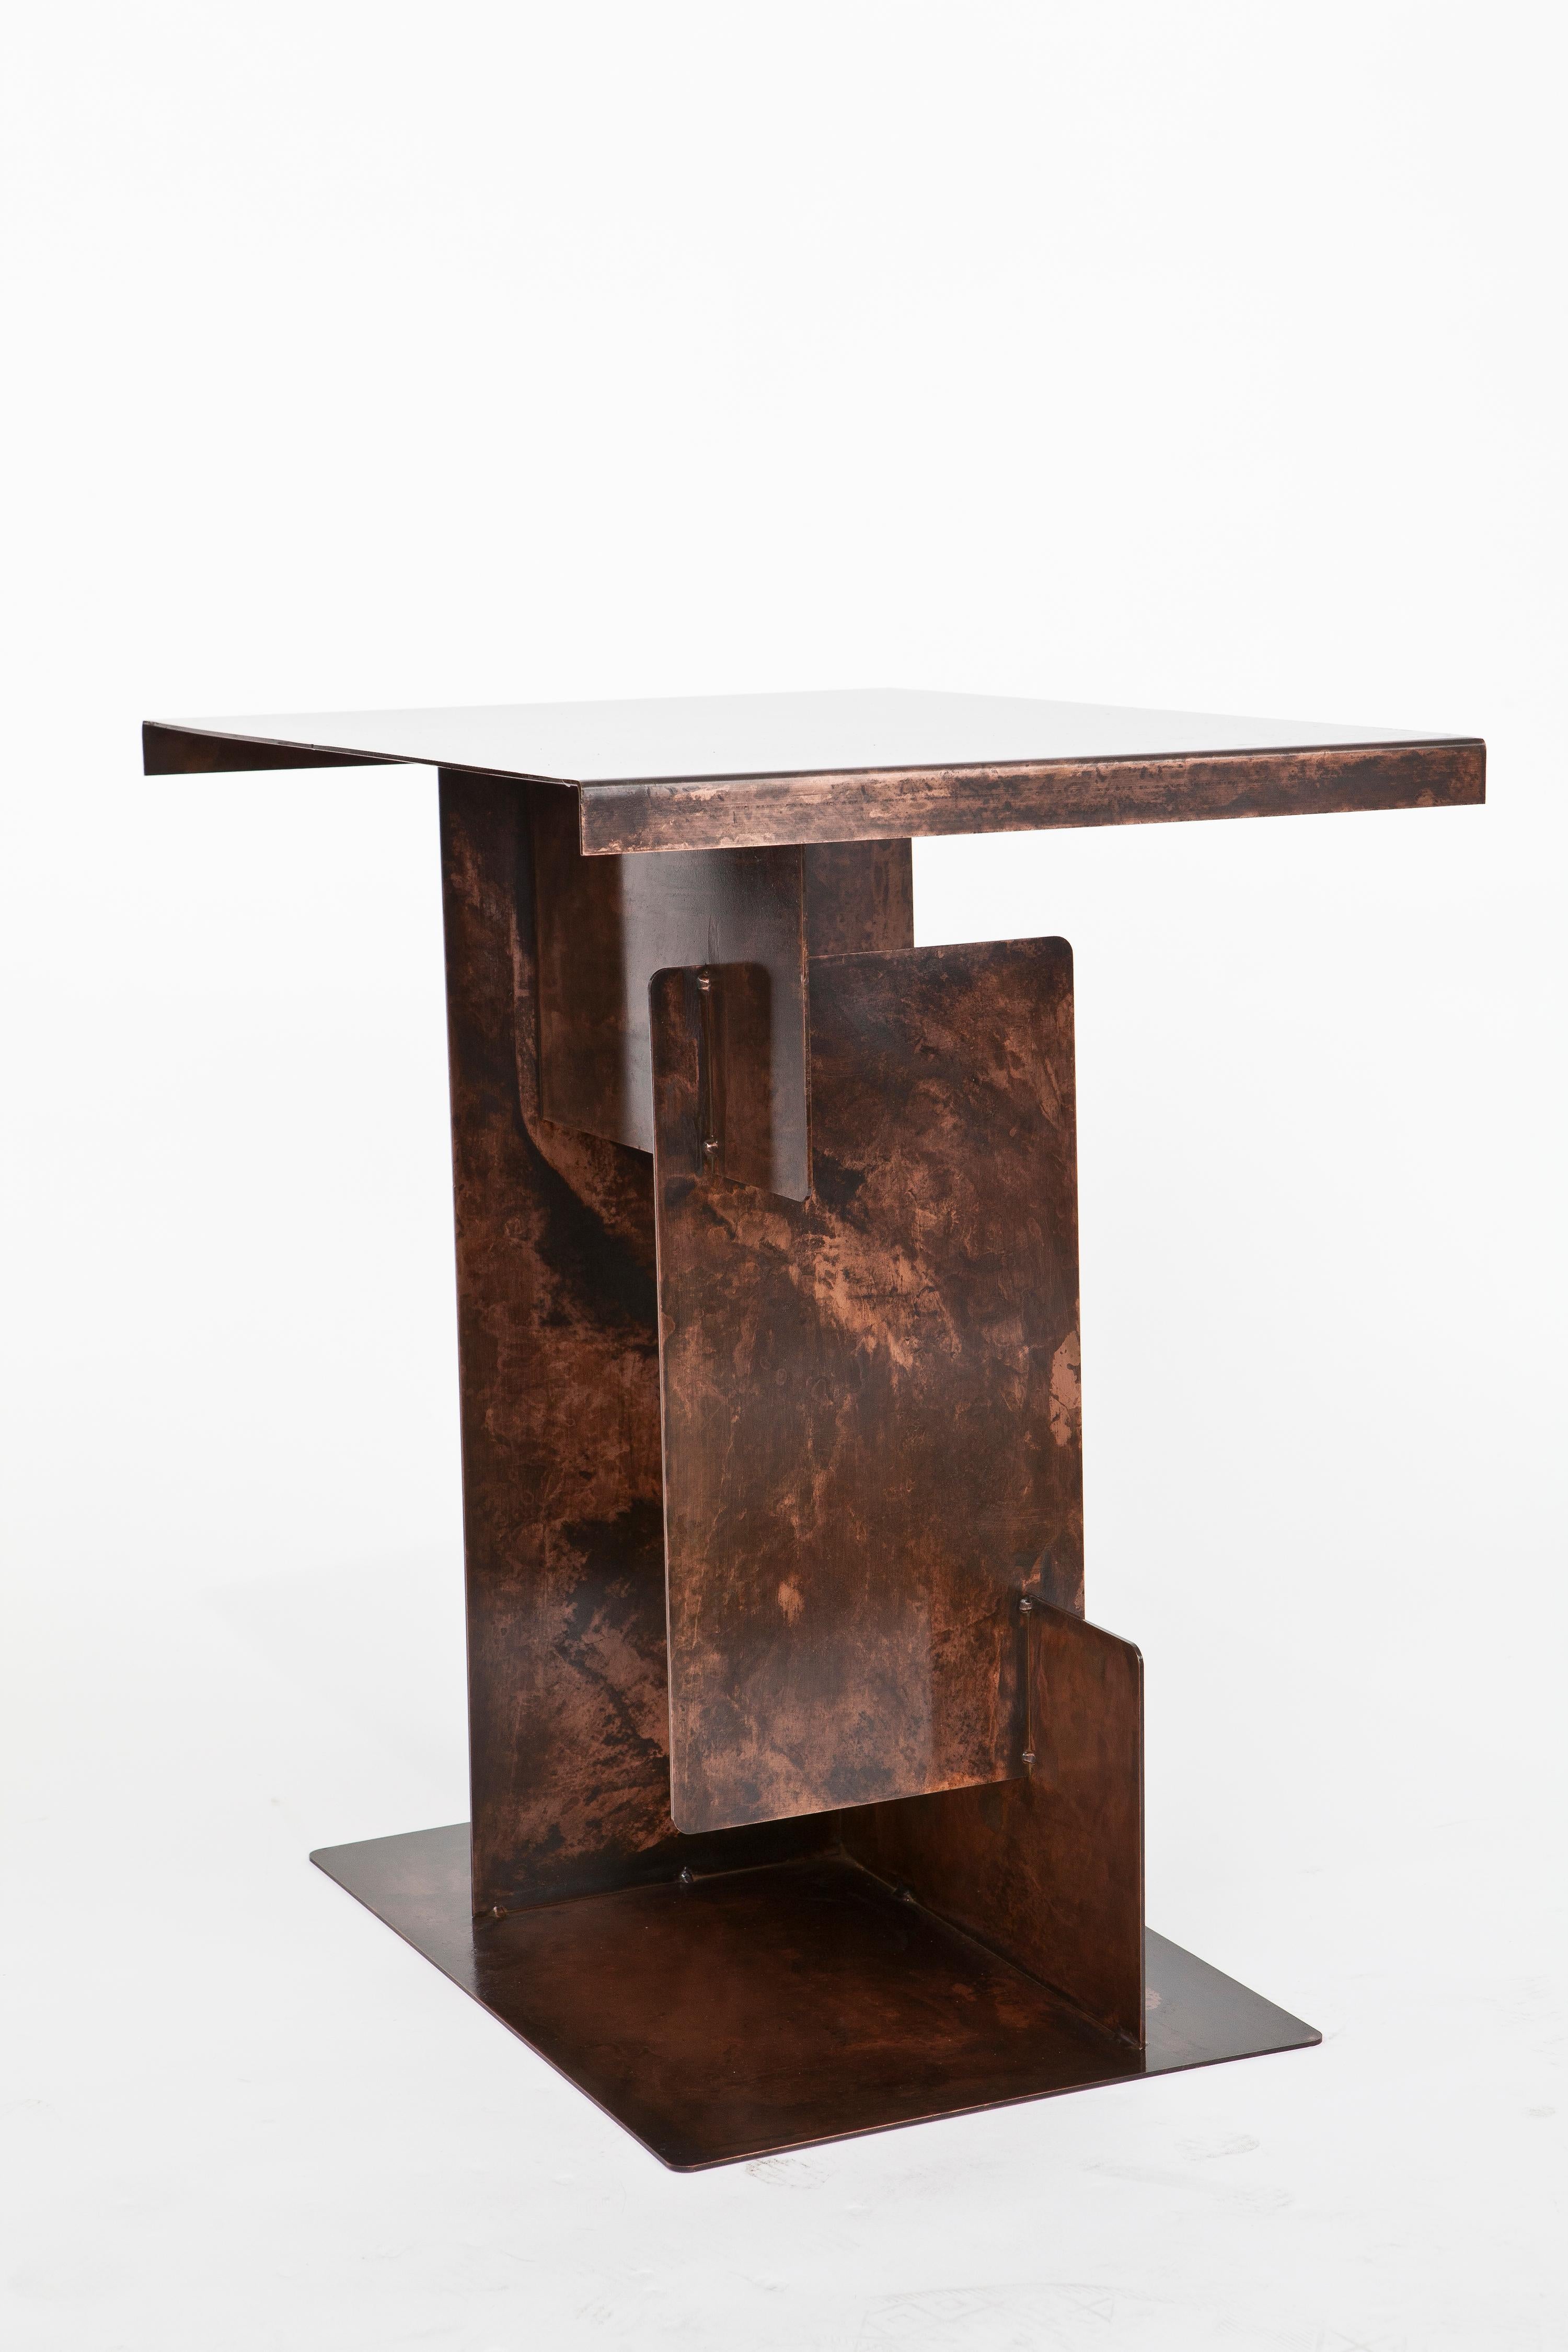 Puzzle side table by Egg Designs
Dimensions: 61.5 L x 45 D x 63.5 H cm 
Materials: Antique copper, plated steel.

Founded by South Africans and life partners, Greg and Roche Dry - Egg is a unique perspective in contemporary furniture inspired